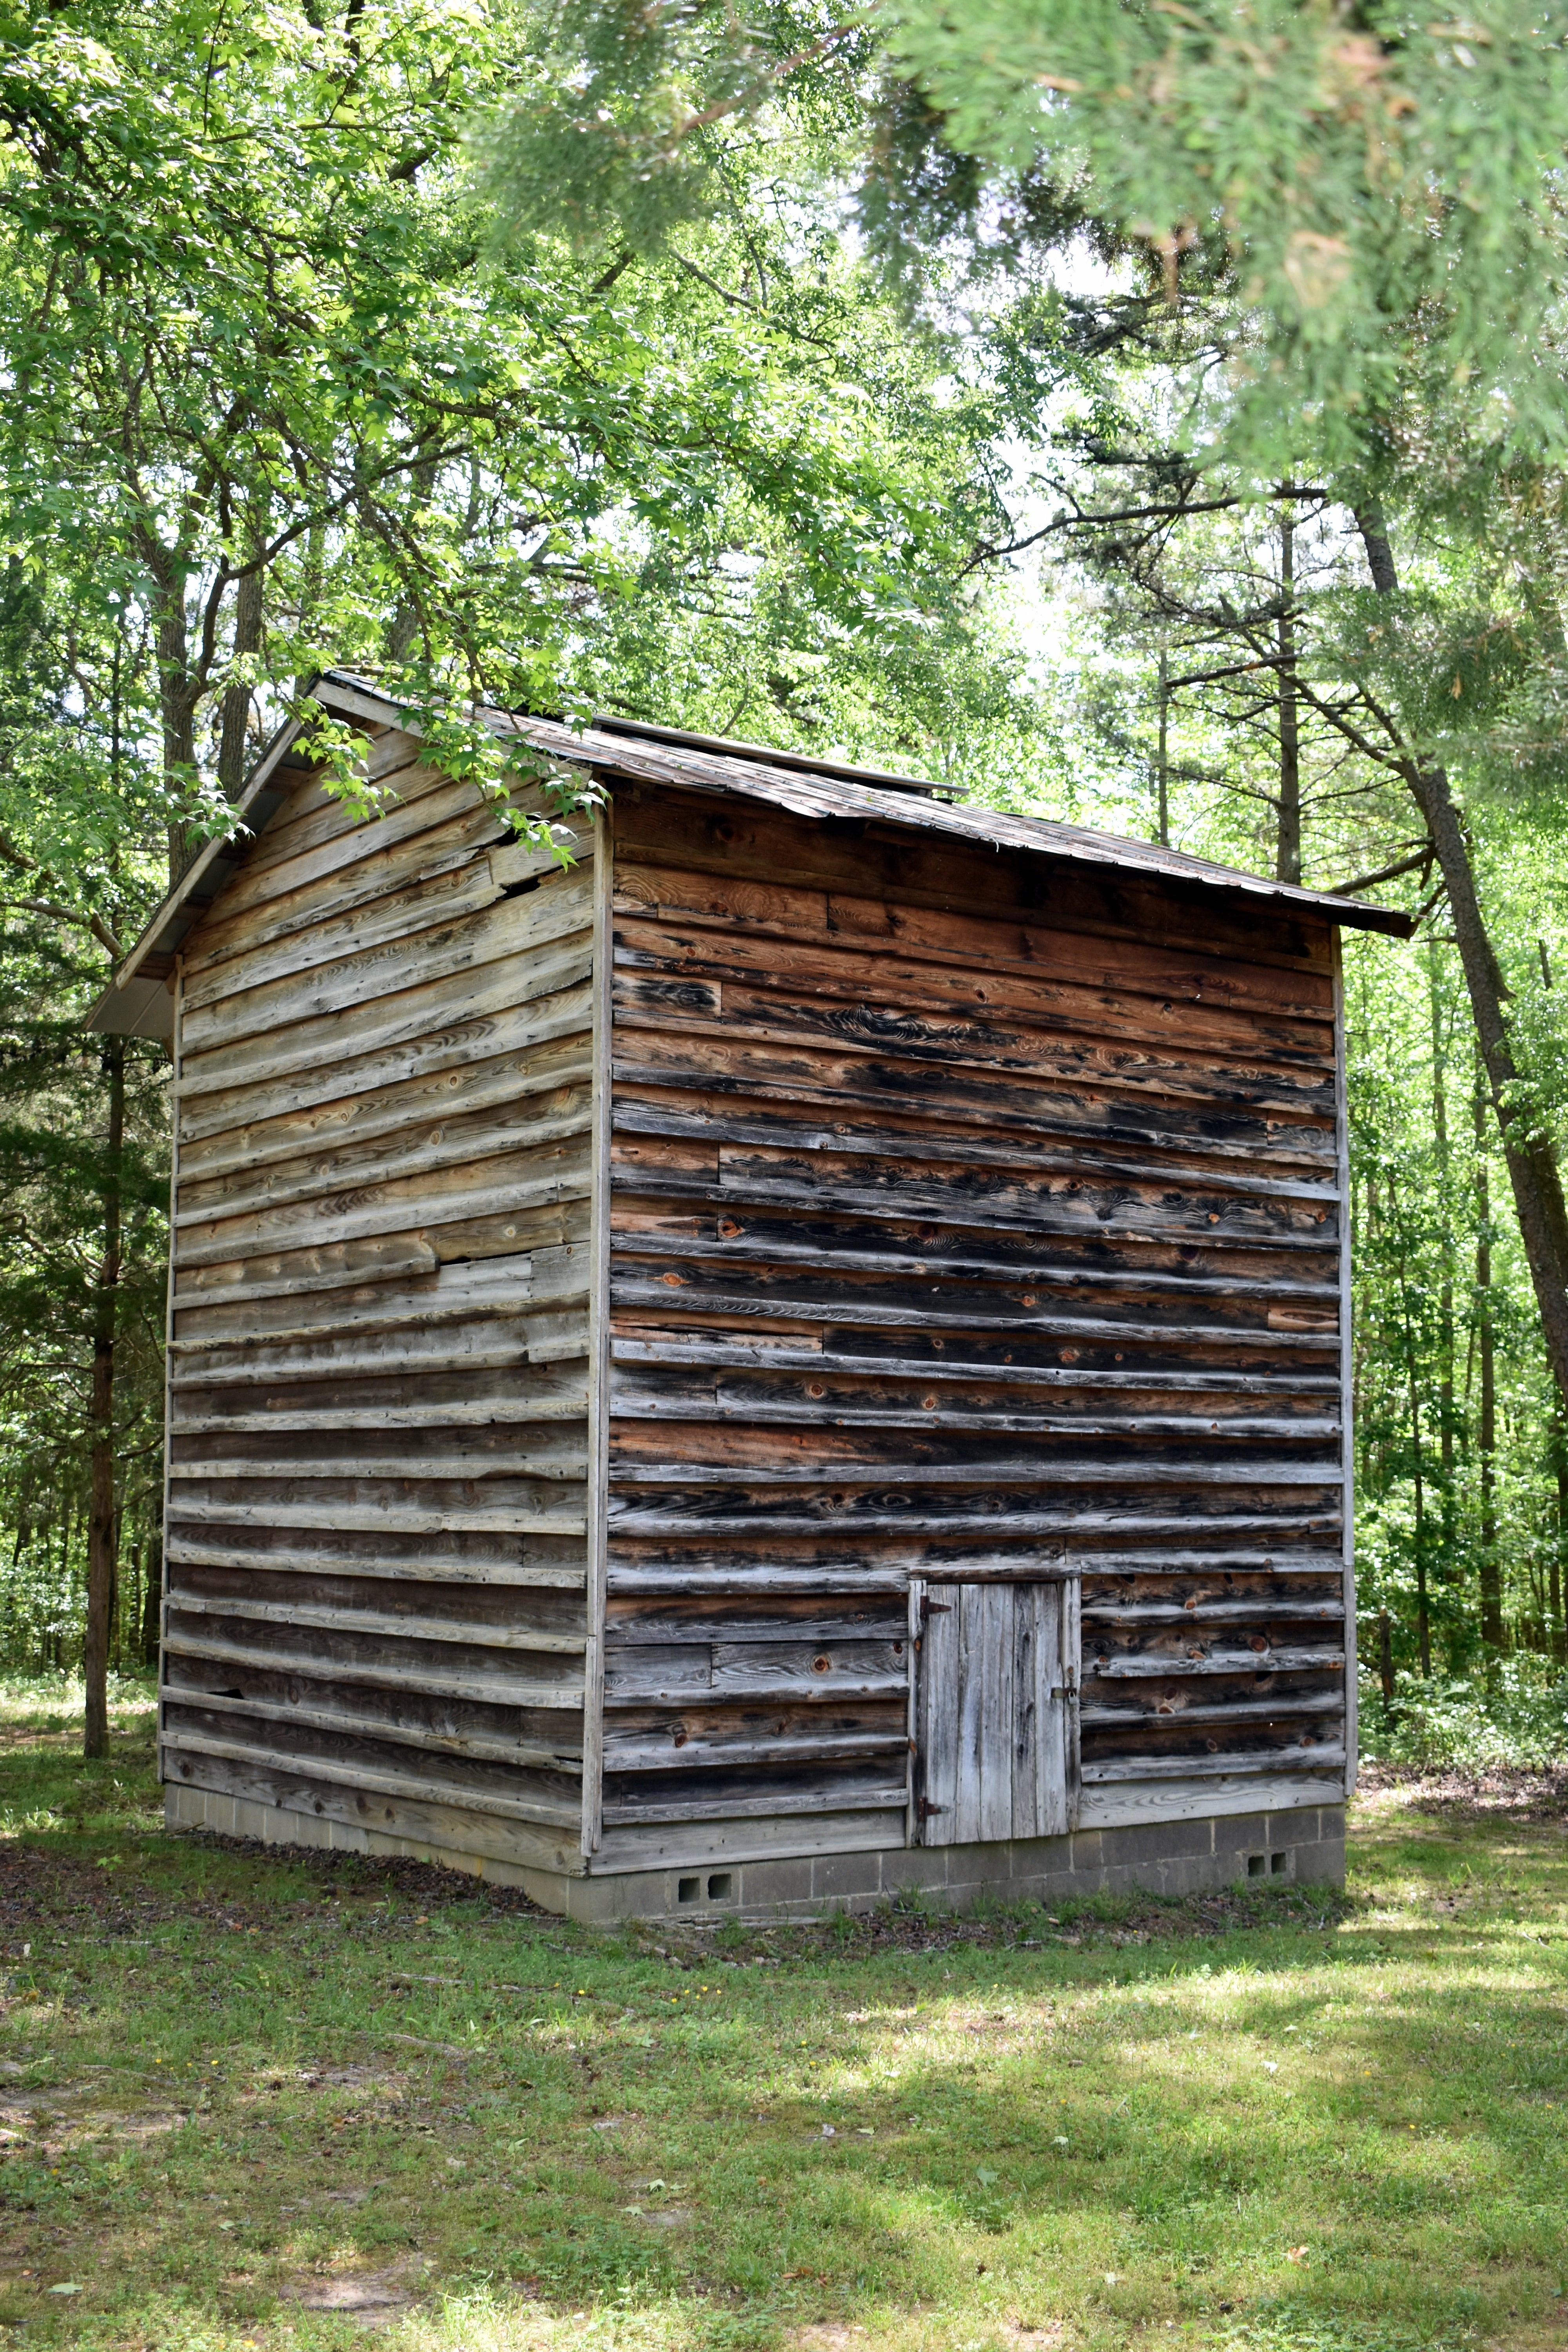 This old tobacco barn is near the picnic shelter in the state park.